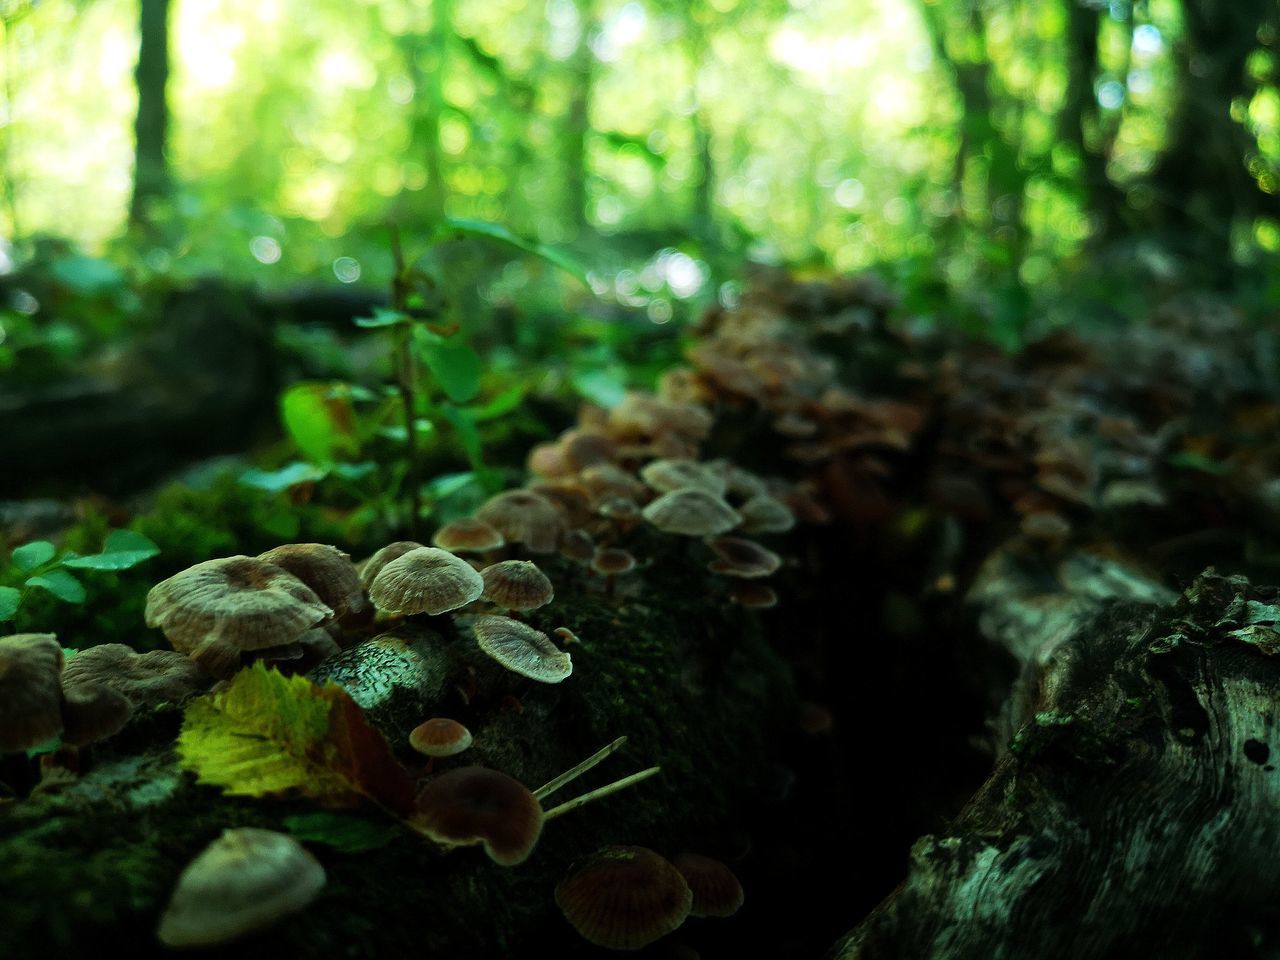 forest, nature, green, natural environment, plant, tree, land, woodland, leaf, rainforest, growth, moss, beauty in nature, fungus, environment, tree trunk, sunlight, no people, vegetable, plant part, mushroom, trunk, jungle, tranquility, outdoors, selective focus, close-up, food, day, old-growth forest, focus on foreground, non-urban scene, freshness, water